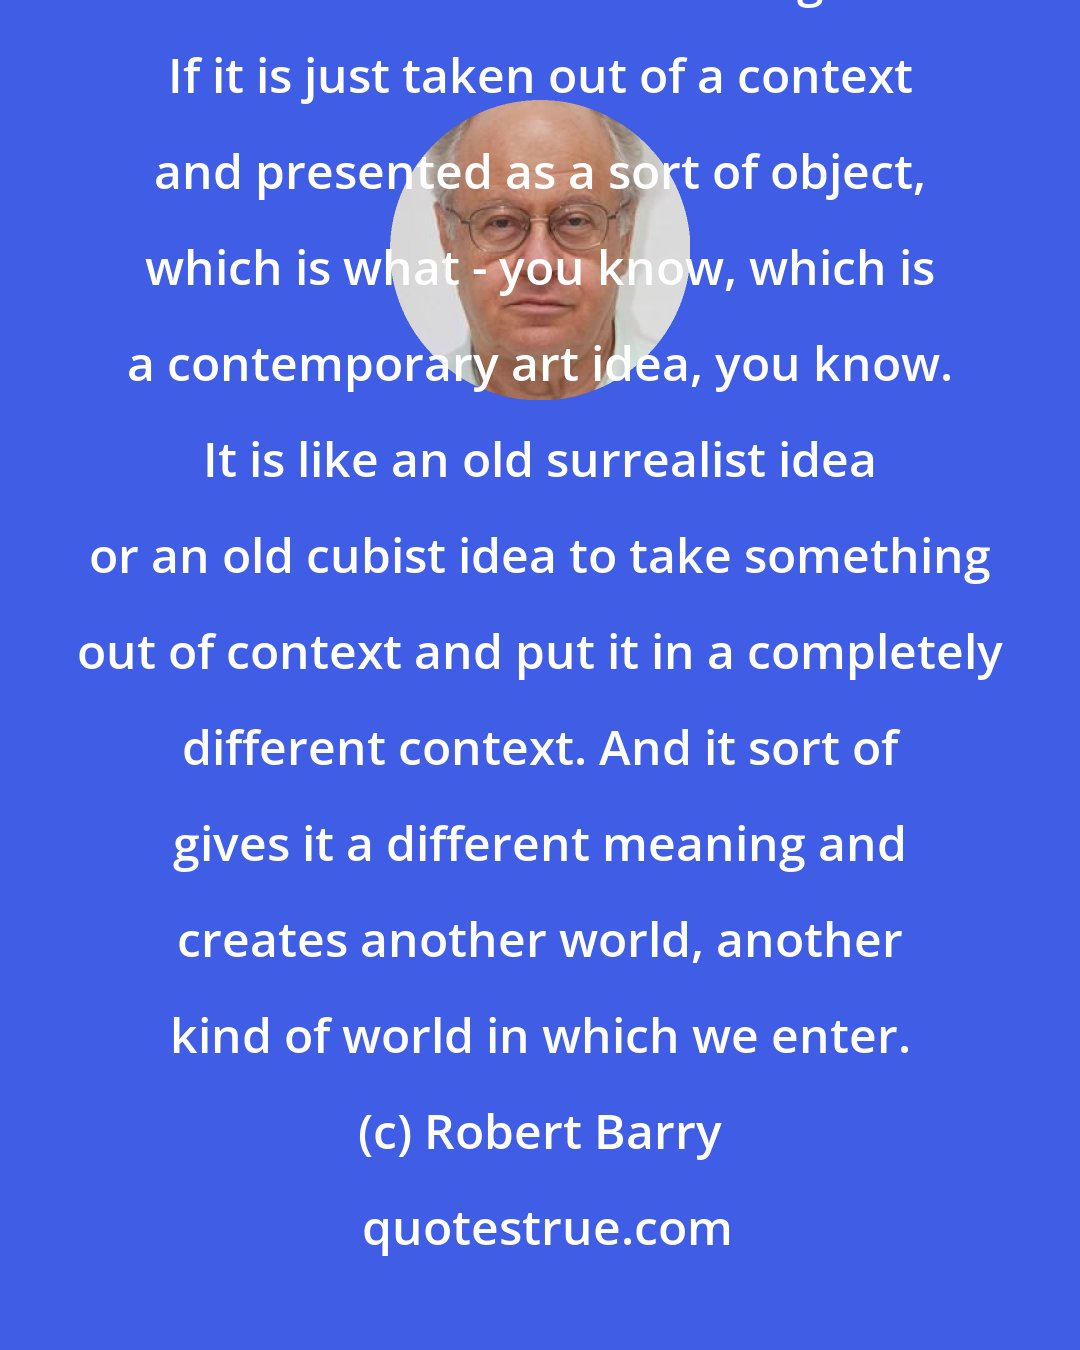 Robert Barry: A text makes the word more specific. It really kind of defines it within the context in which it is being used. If it is just taken out of a context and presented as a sort of object, which is what - you know, which is a contemporary art idea, you know. It is like an old surrealist idea or an old cubist idea to take something out of context and put it in a completely different context. And it sort of gives it a different meaning and creates another world, another kind of world in which we enter.